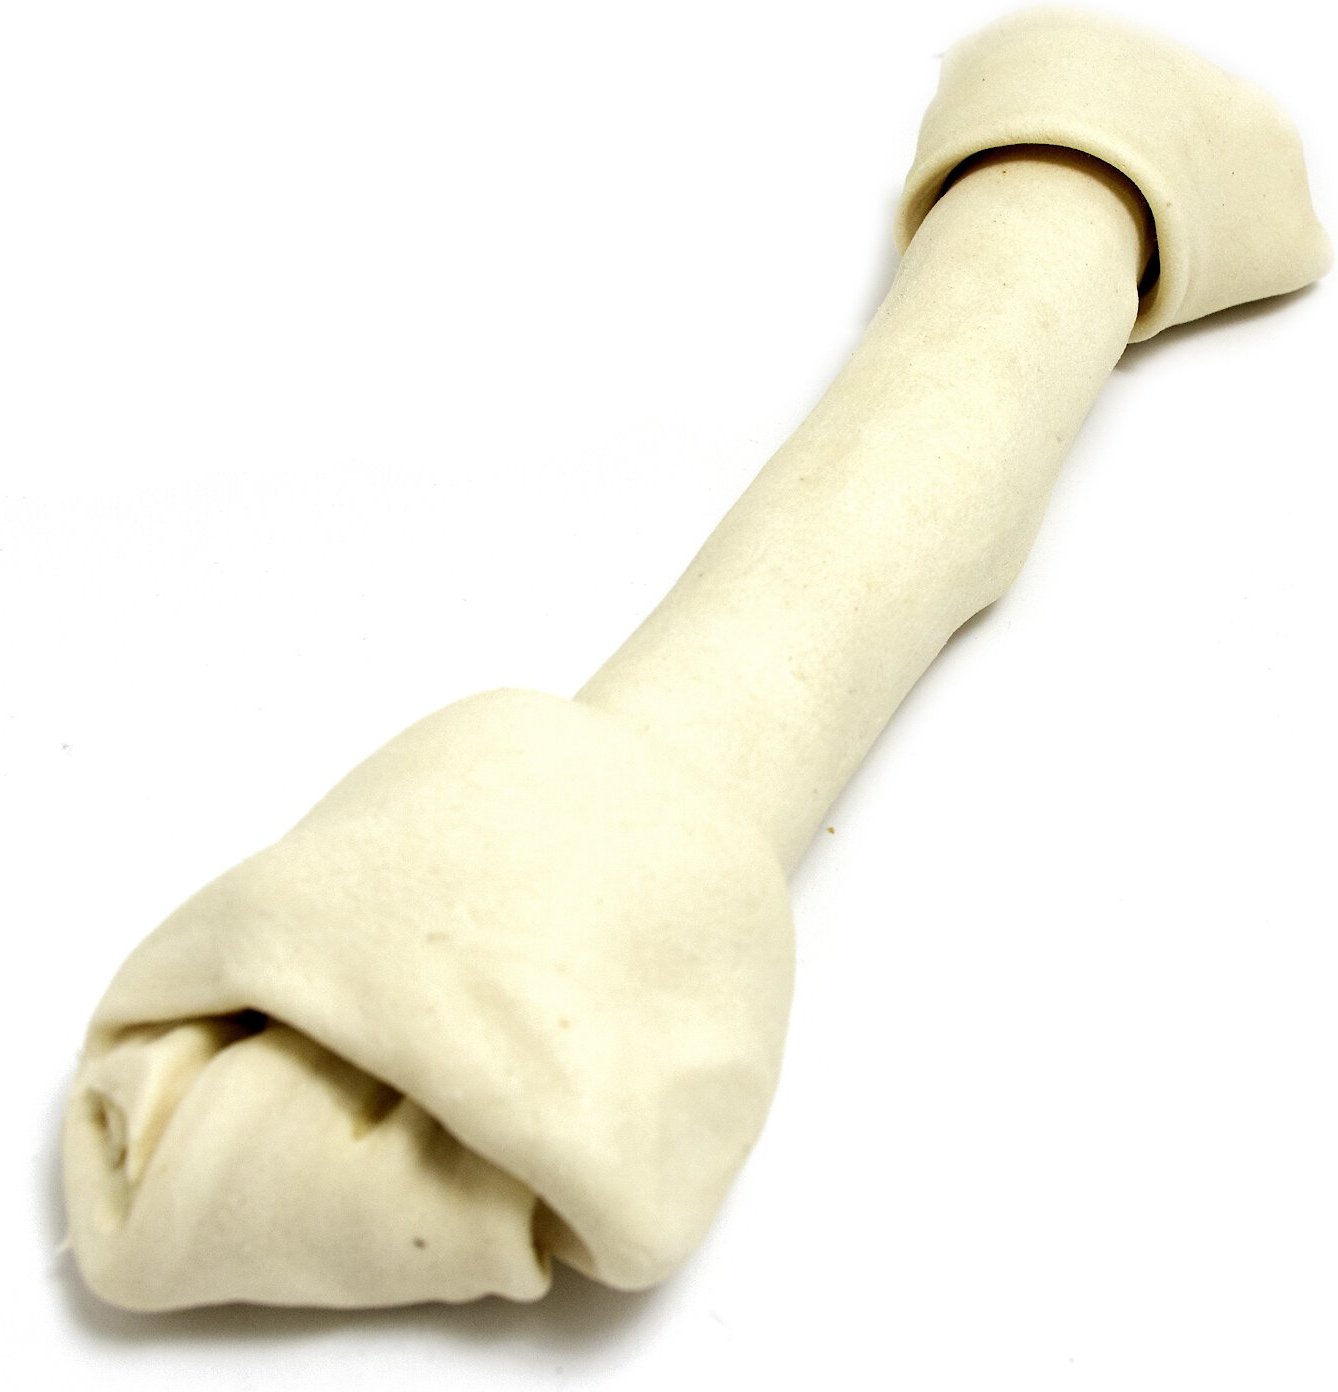 rawhide for dogs